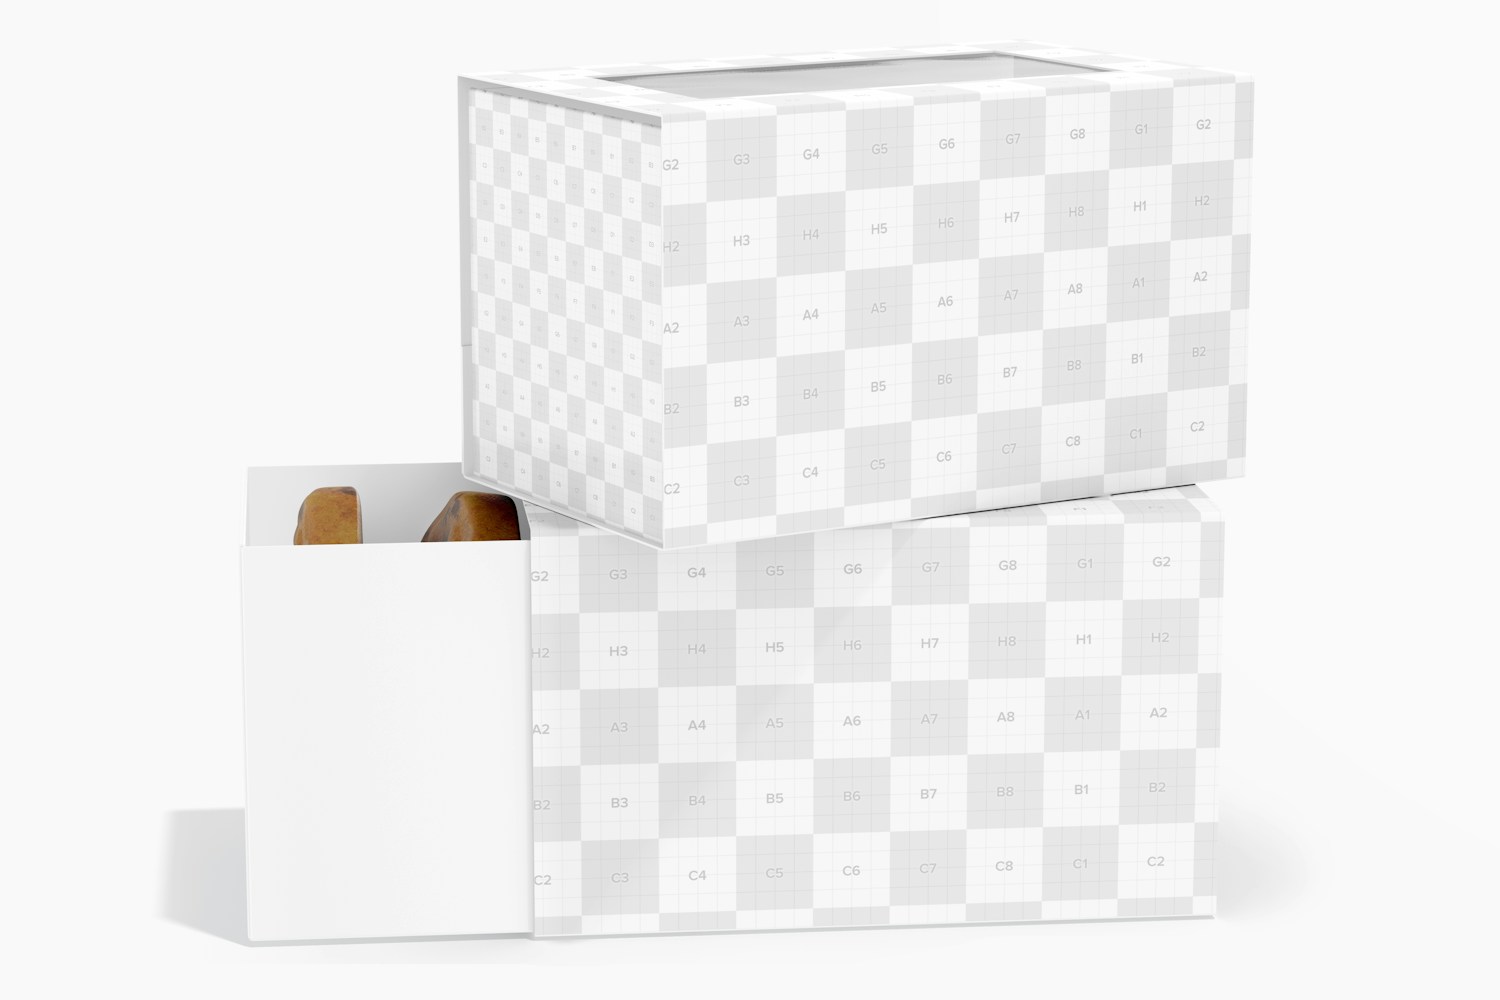 Rectangular Cookie Boxes Mockup, Stacked